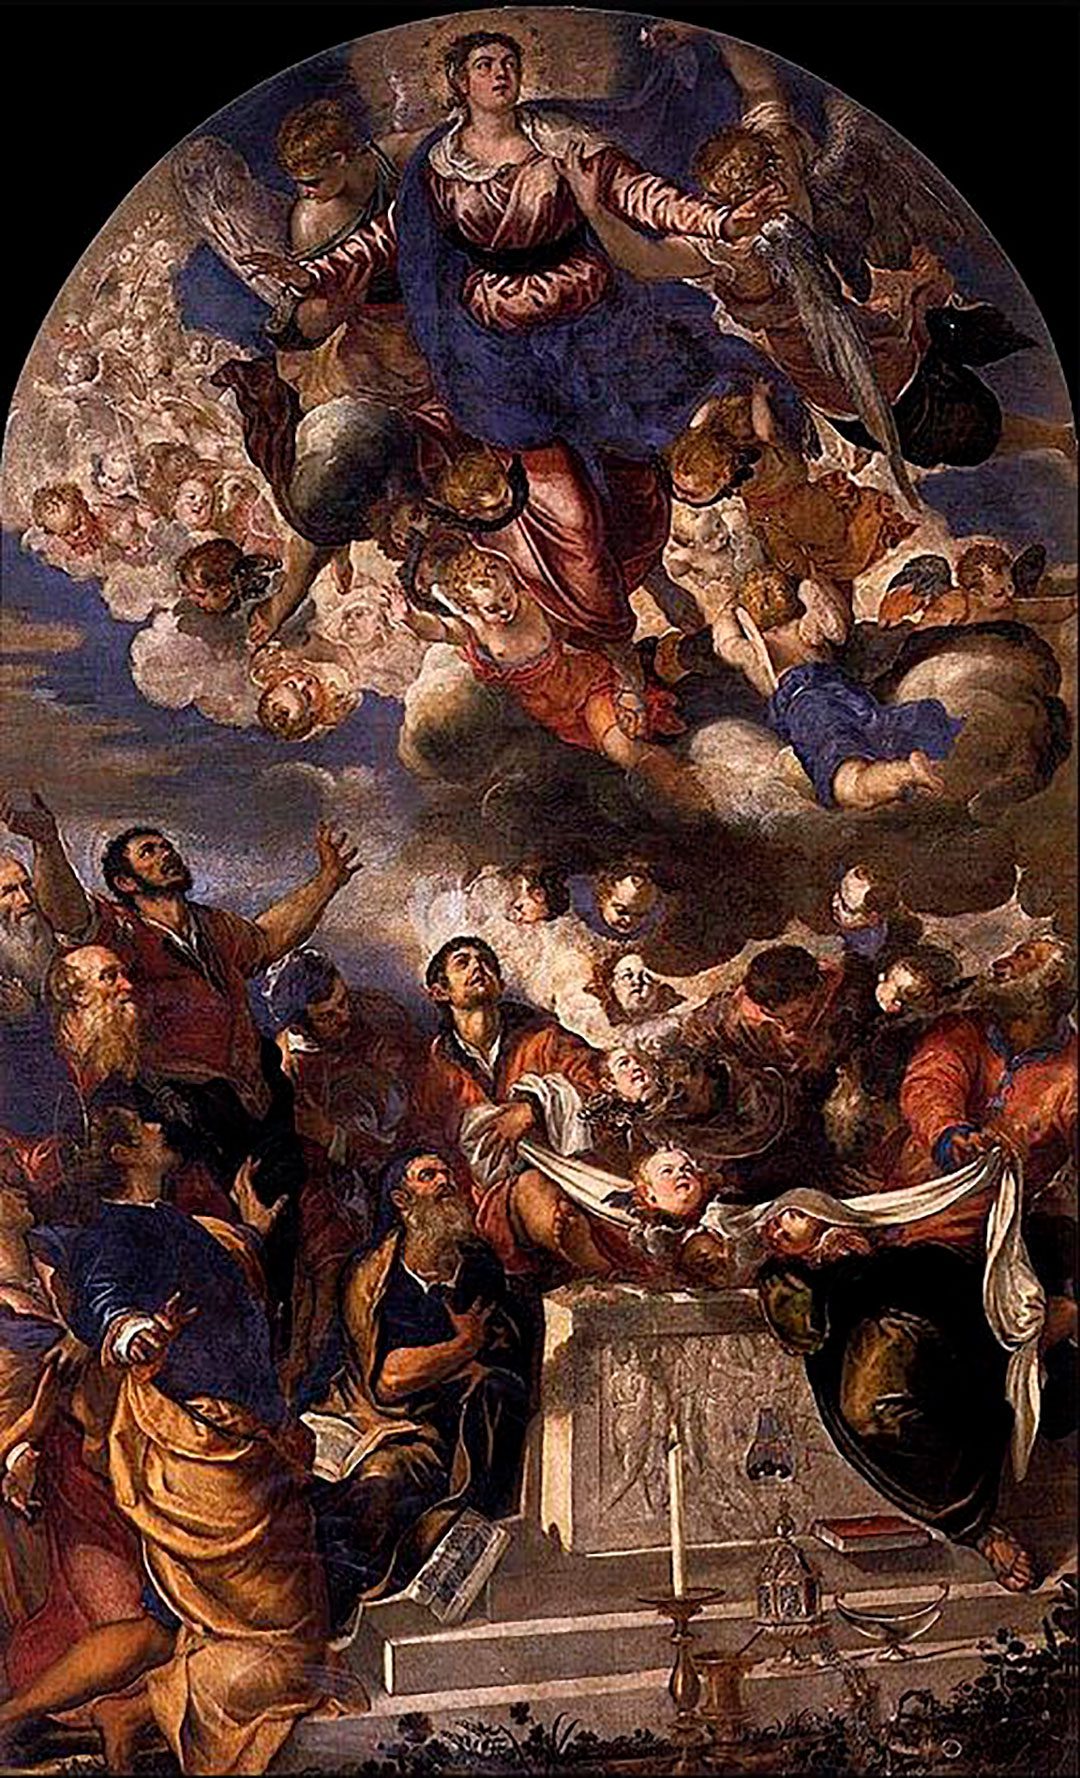 Assumption of Our Lady, the work of Tintoretto